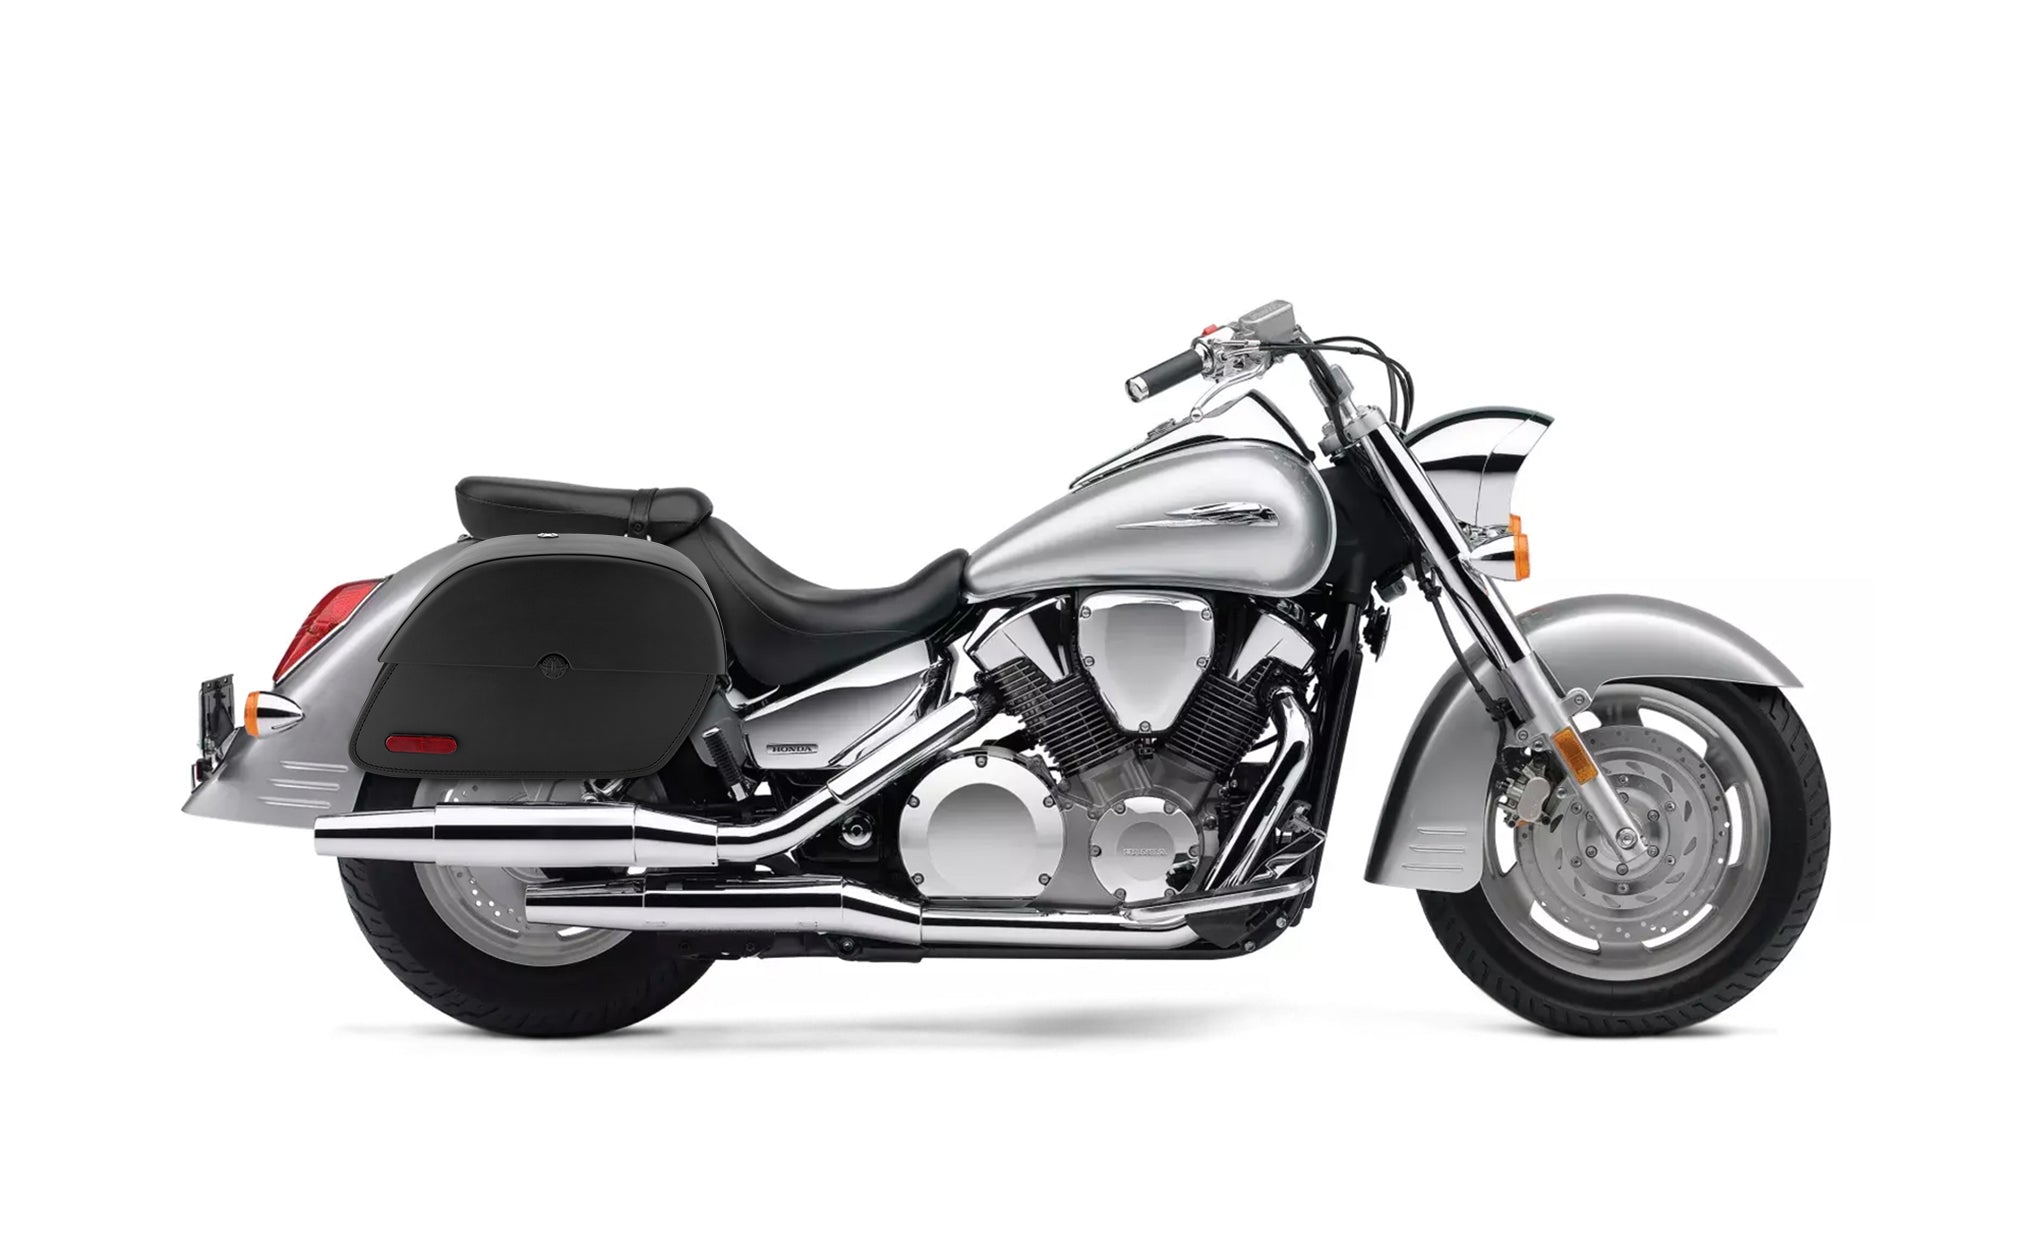 Viking Panzer Medium Honda Vtx 1300 S Leather Motorcycle Saddlebags Engineering Excellence with Bag on Bike @expand